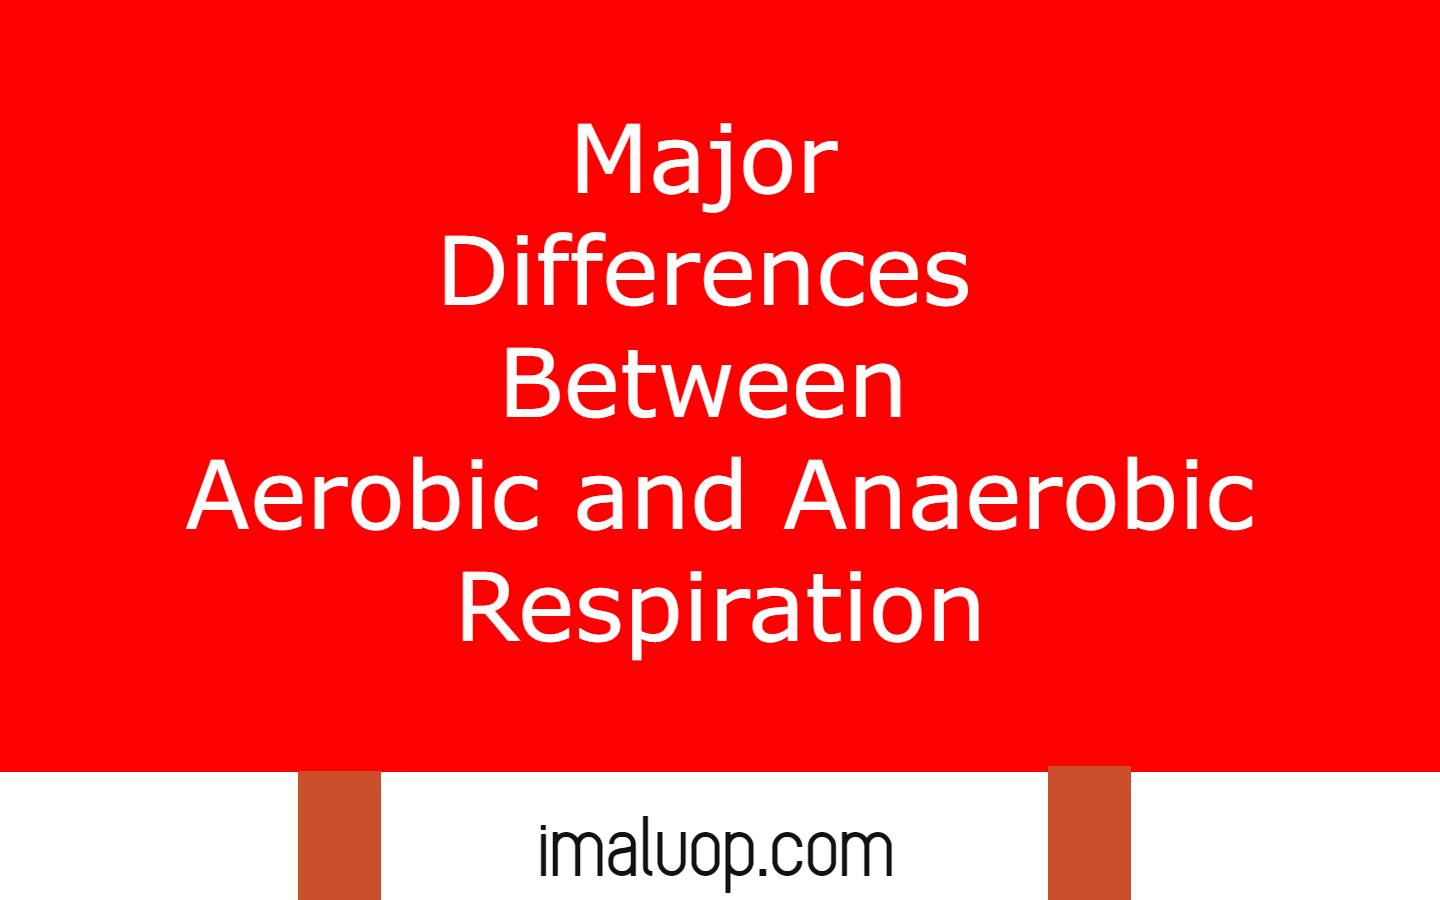 Differences Between Aerobic and Anaerobic Respiration